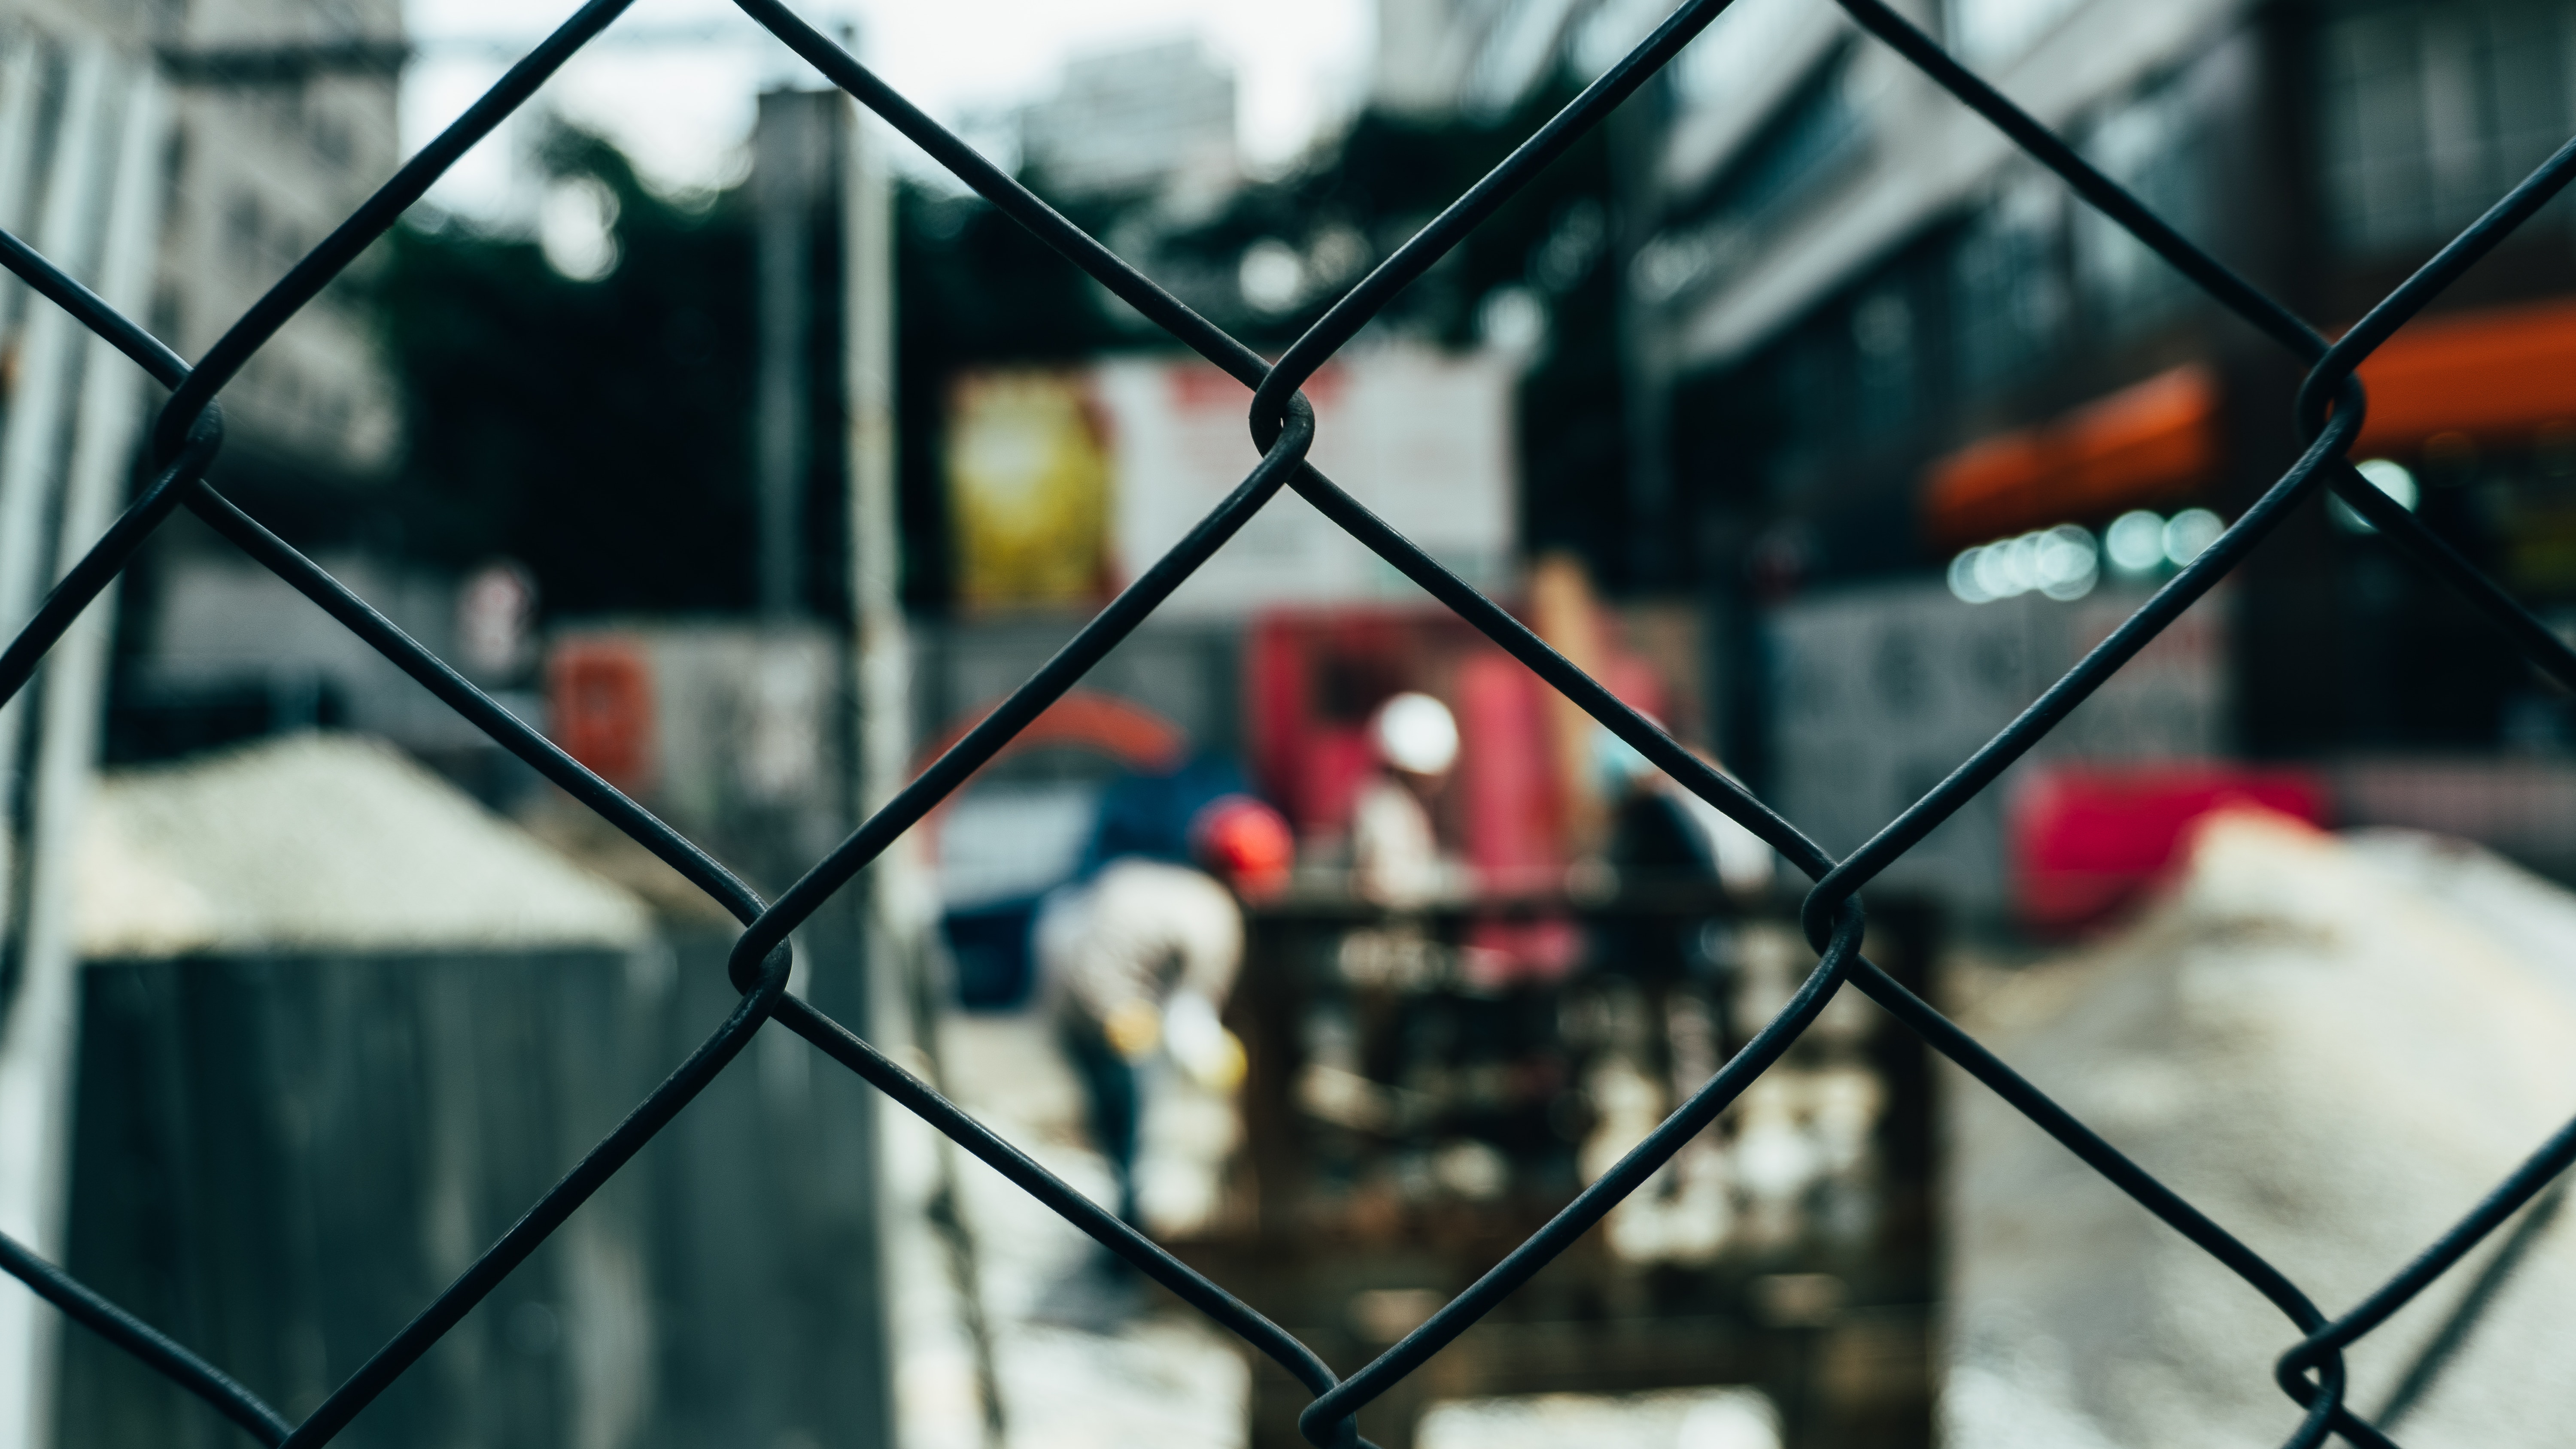 close up photo of chain link fence